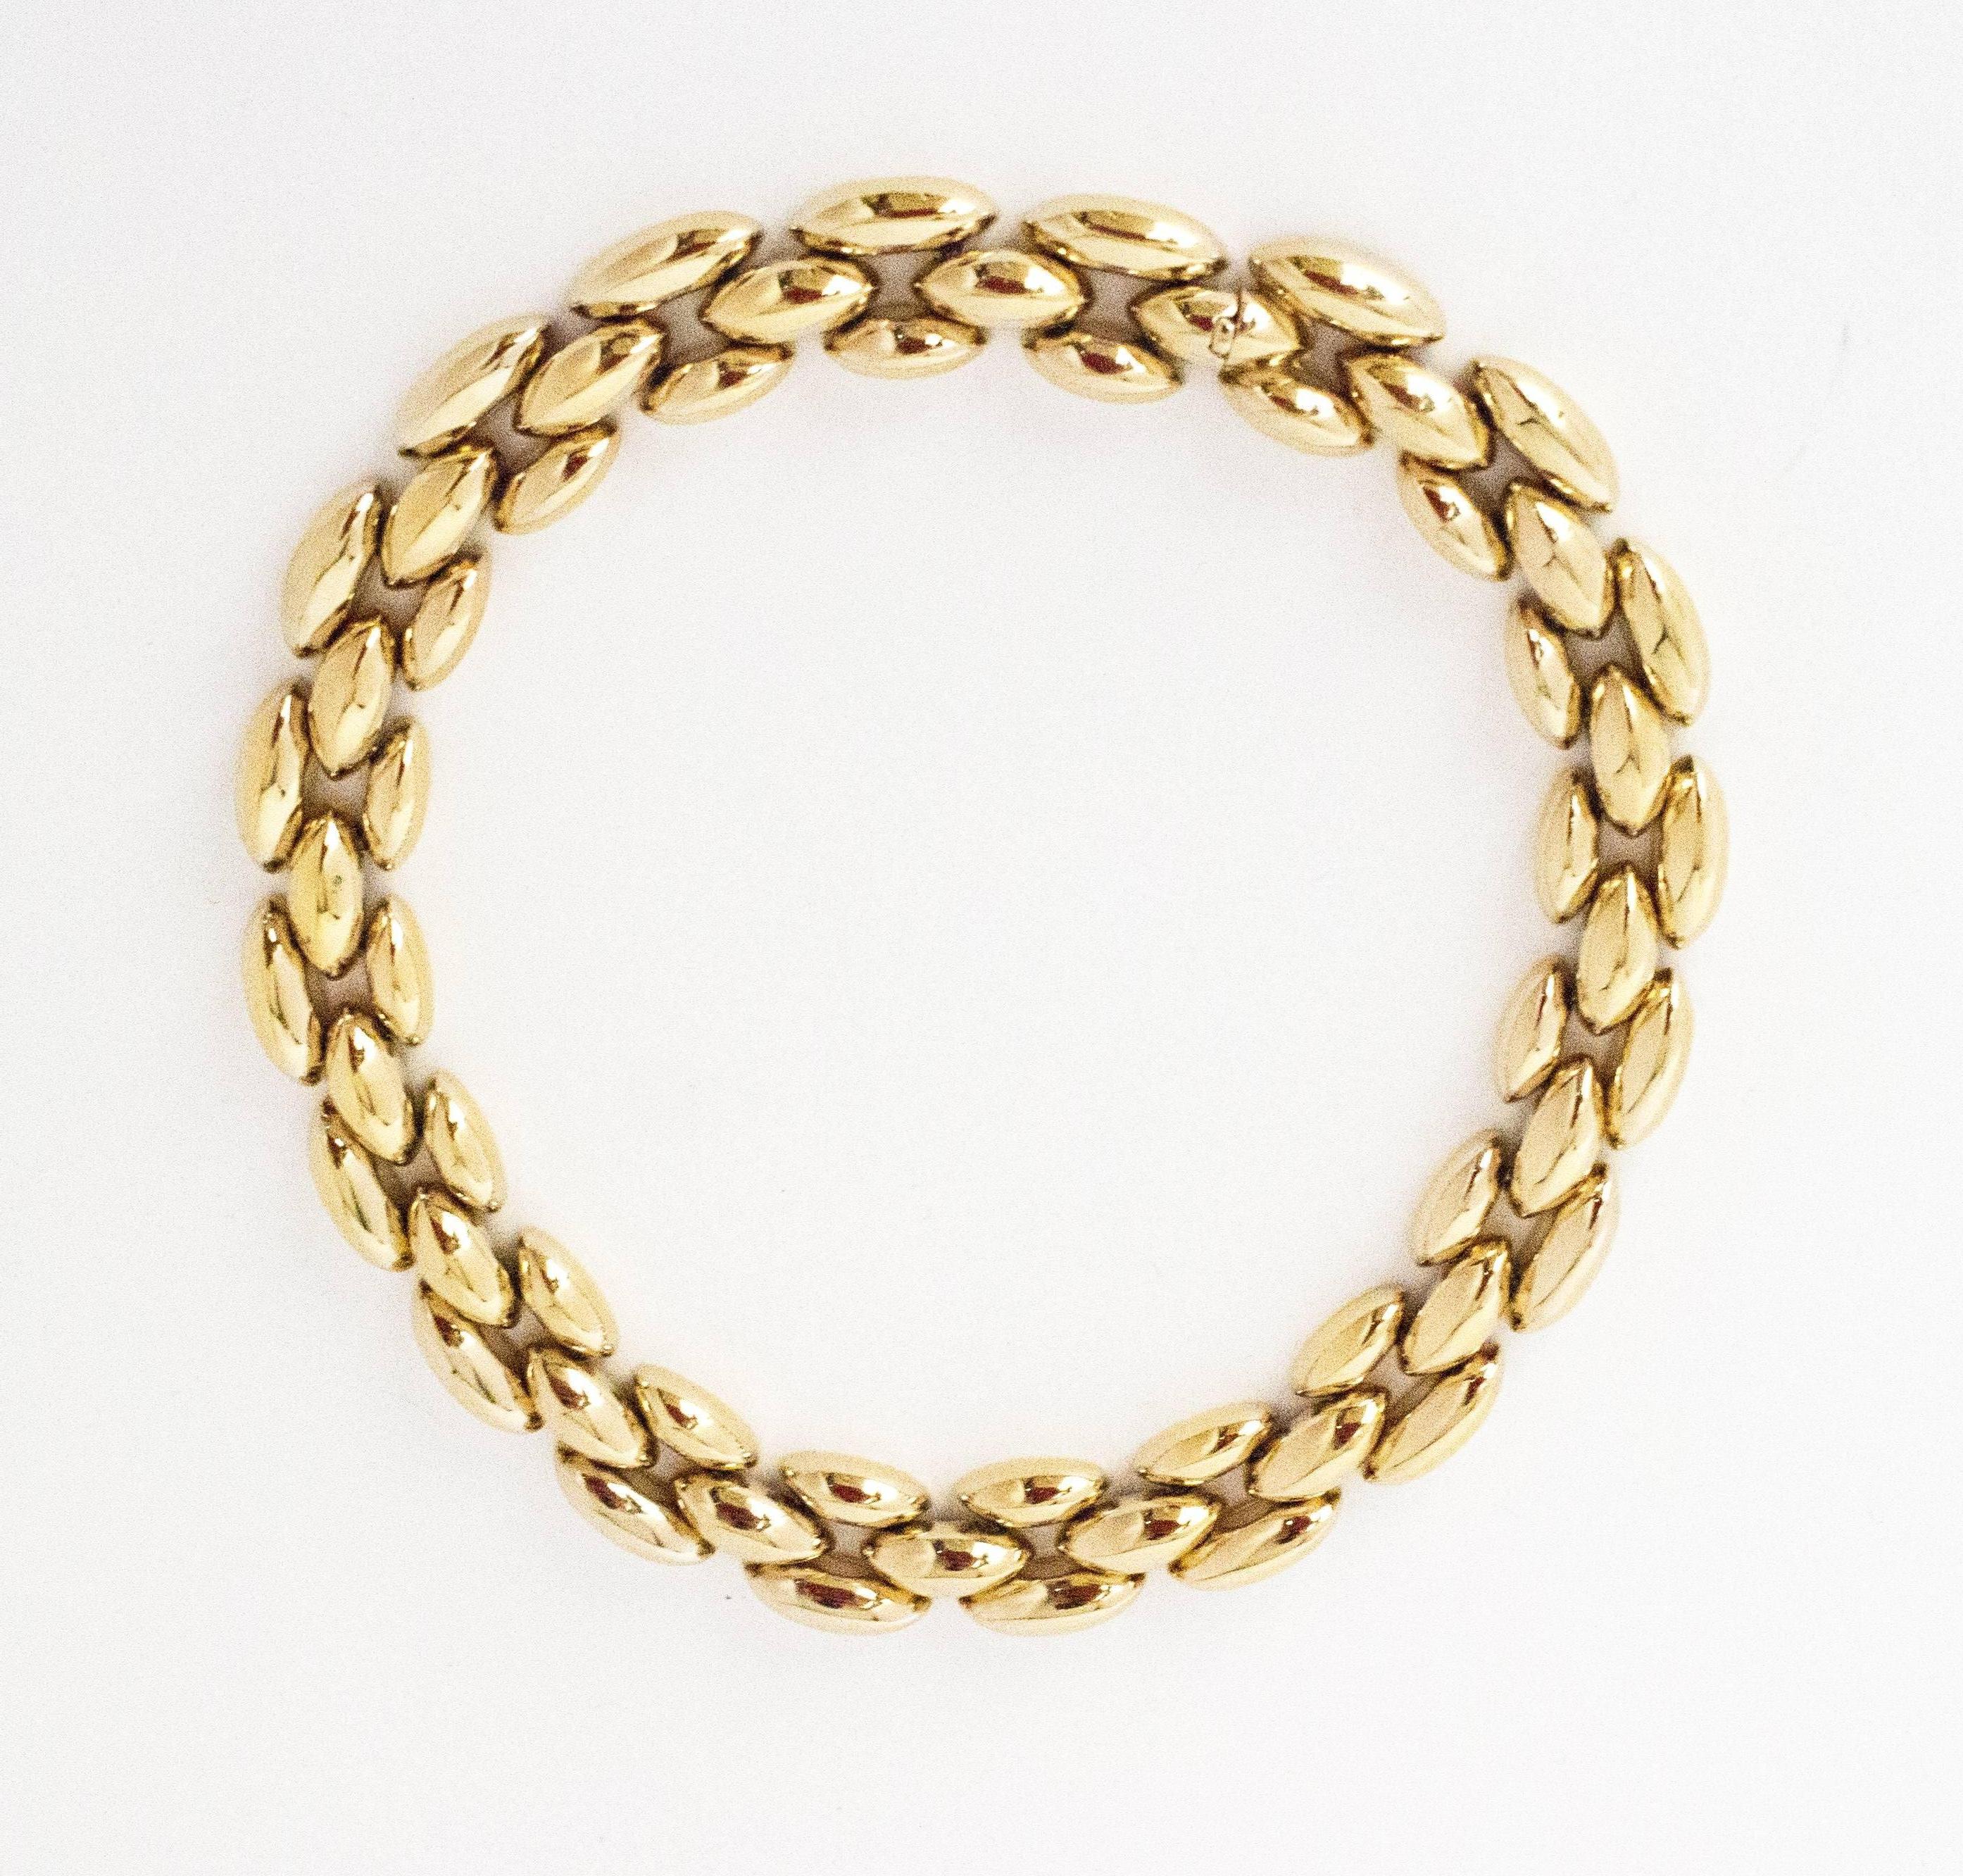 80s Ciner Gold Tone Linked Necklace. Signed behind the secure clasp. 